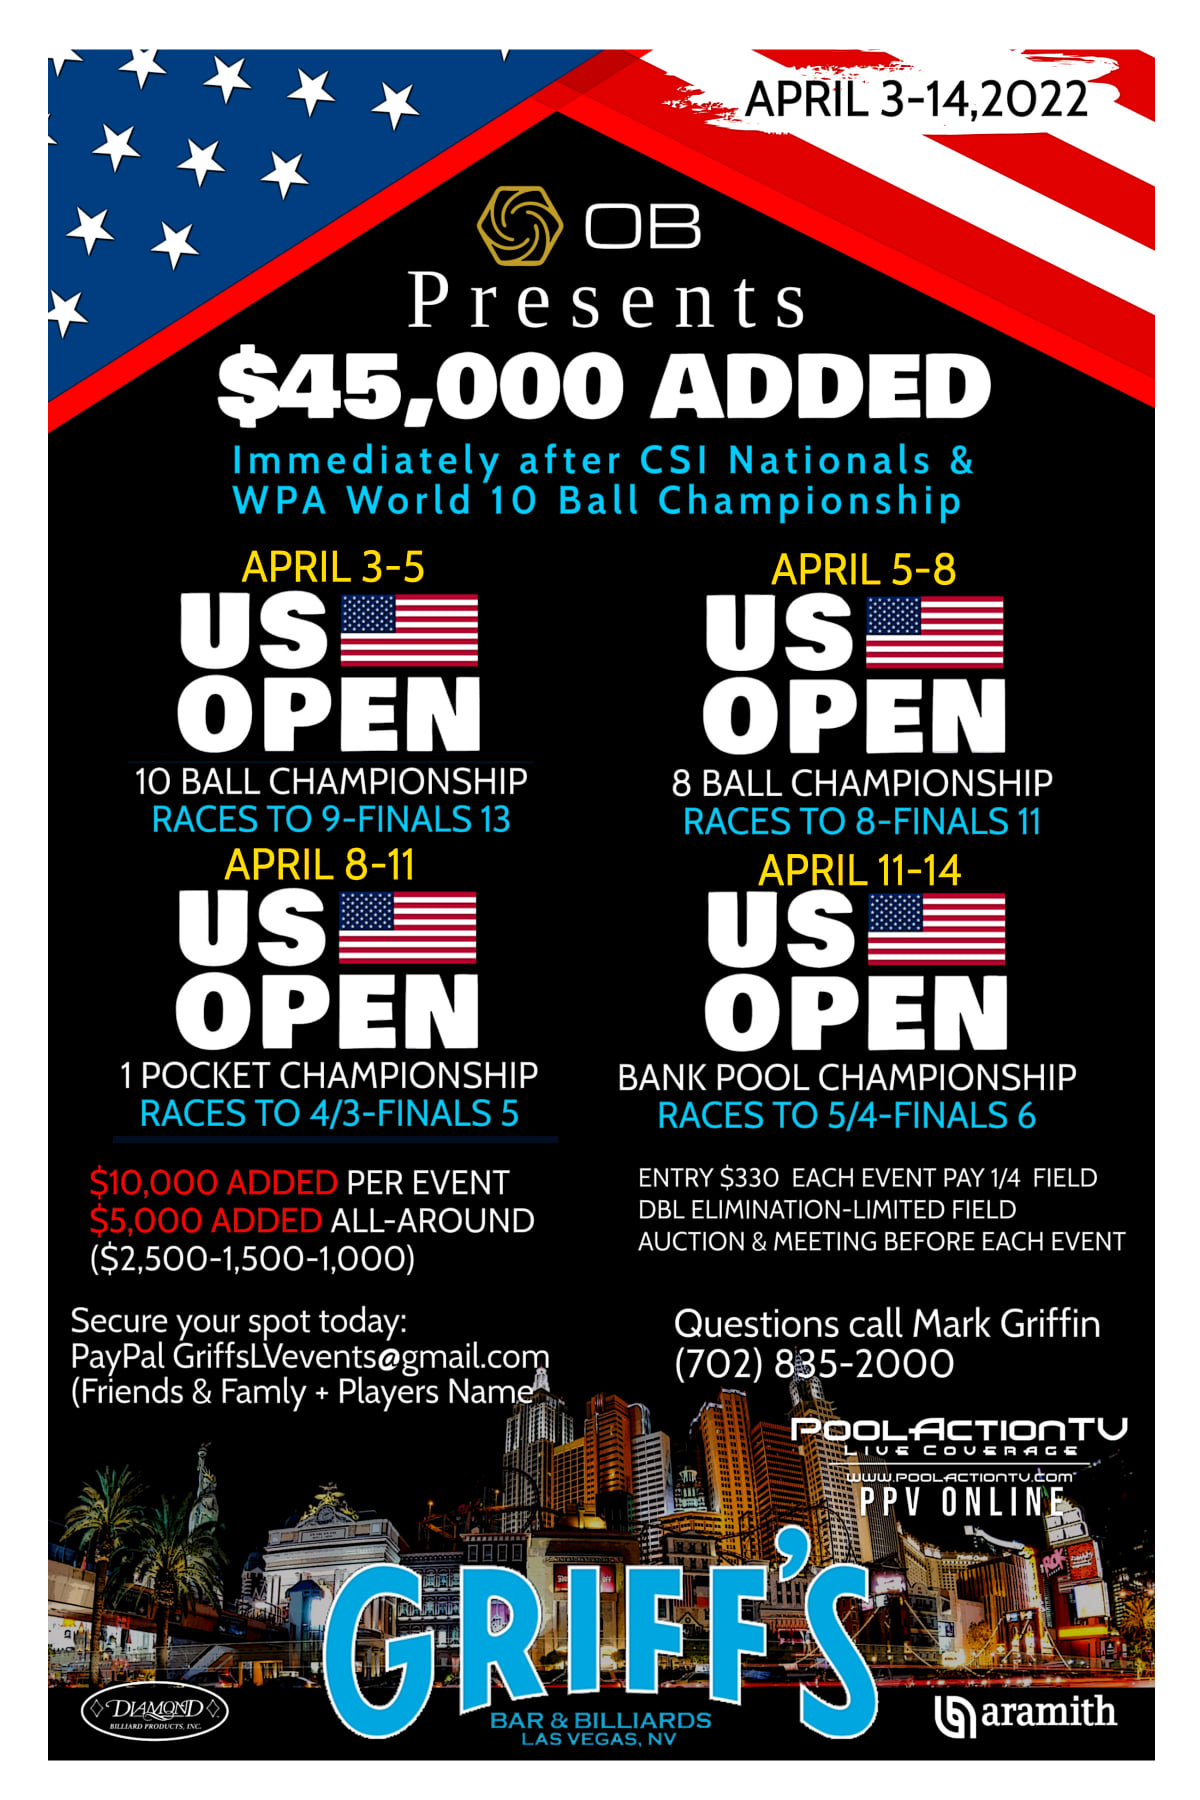 Tournament slots still available, Register Now for the US Open 2022!